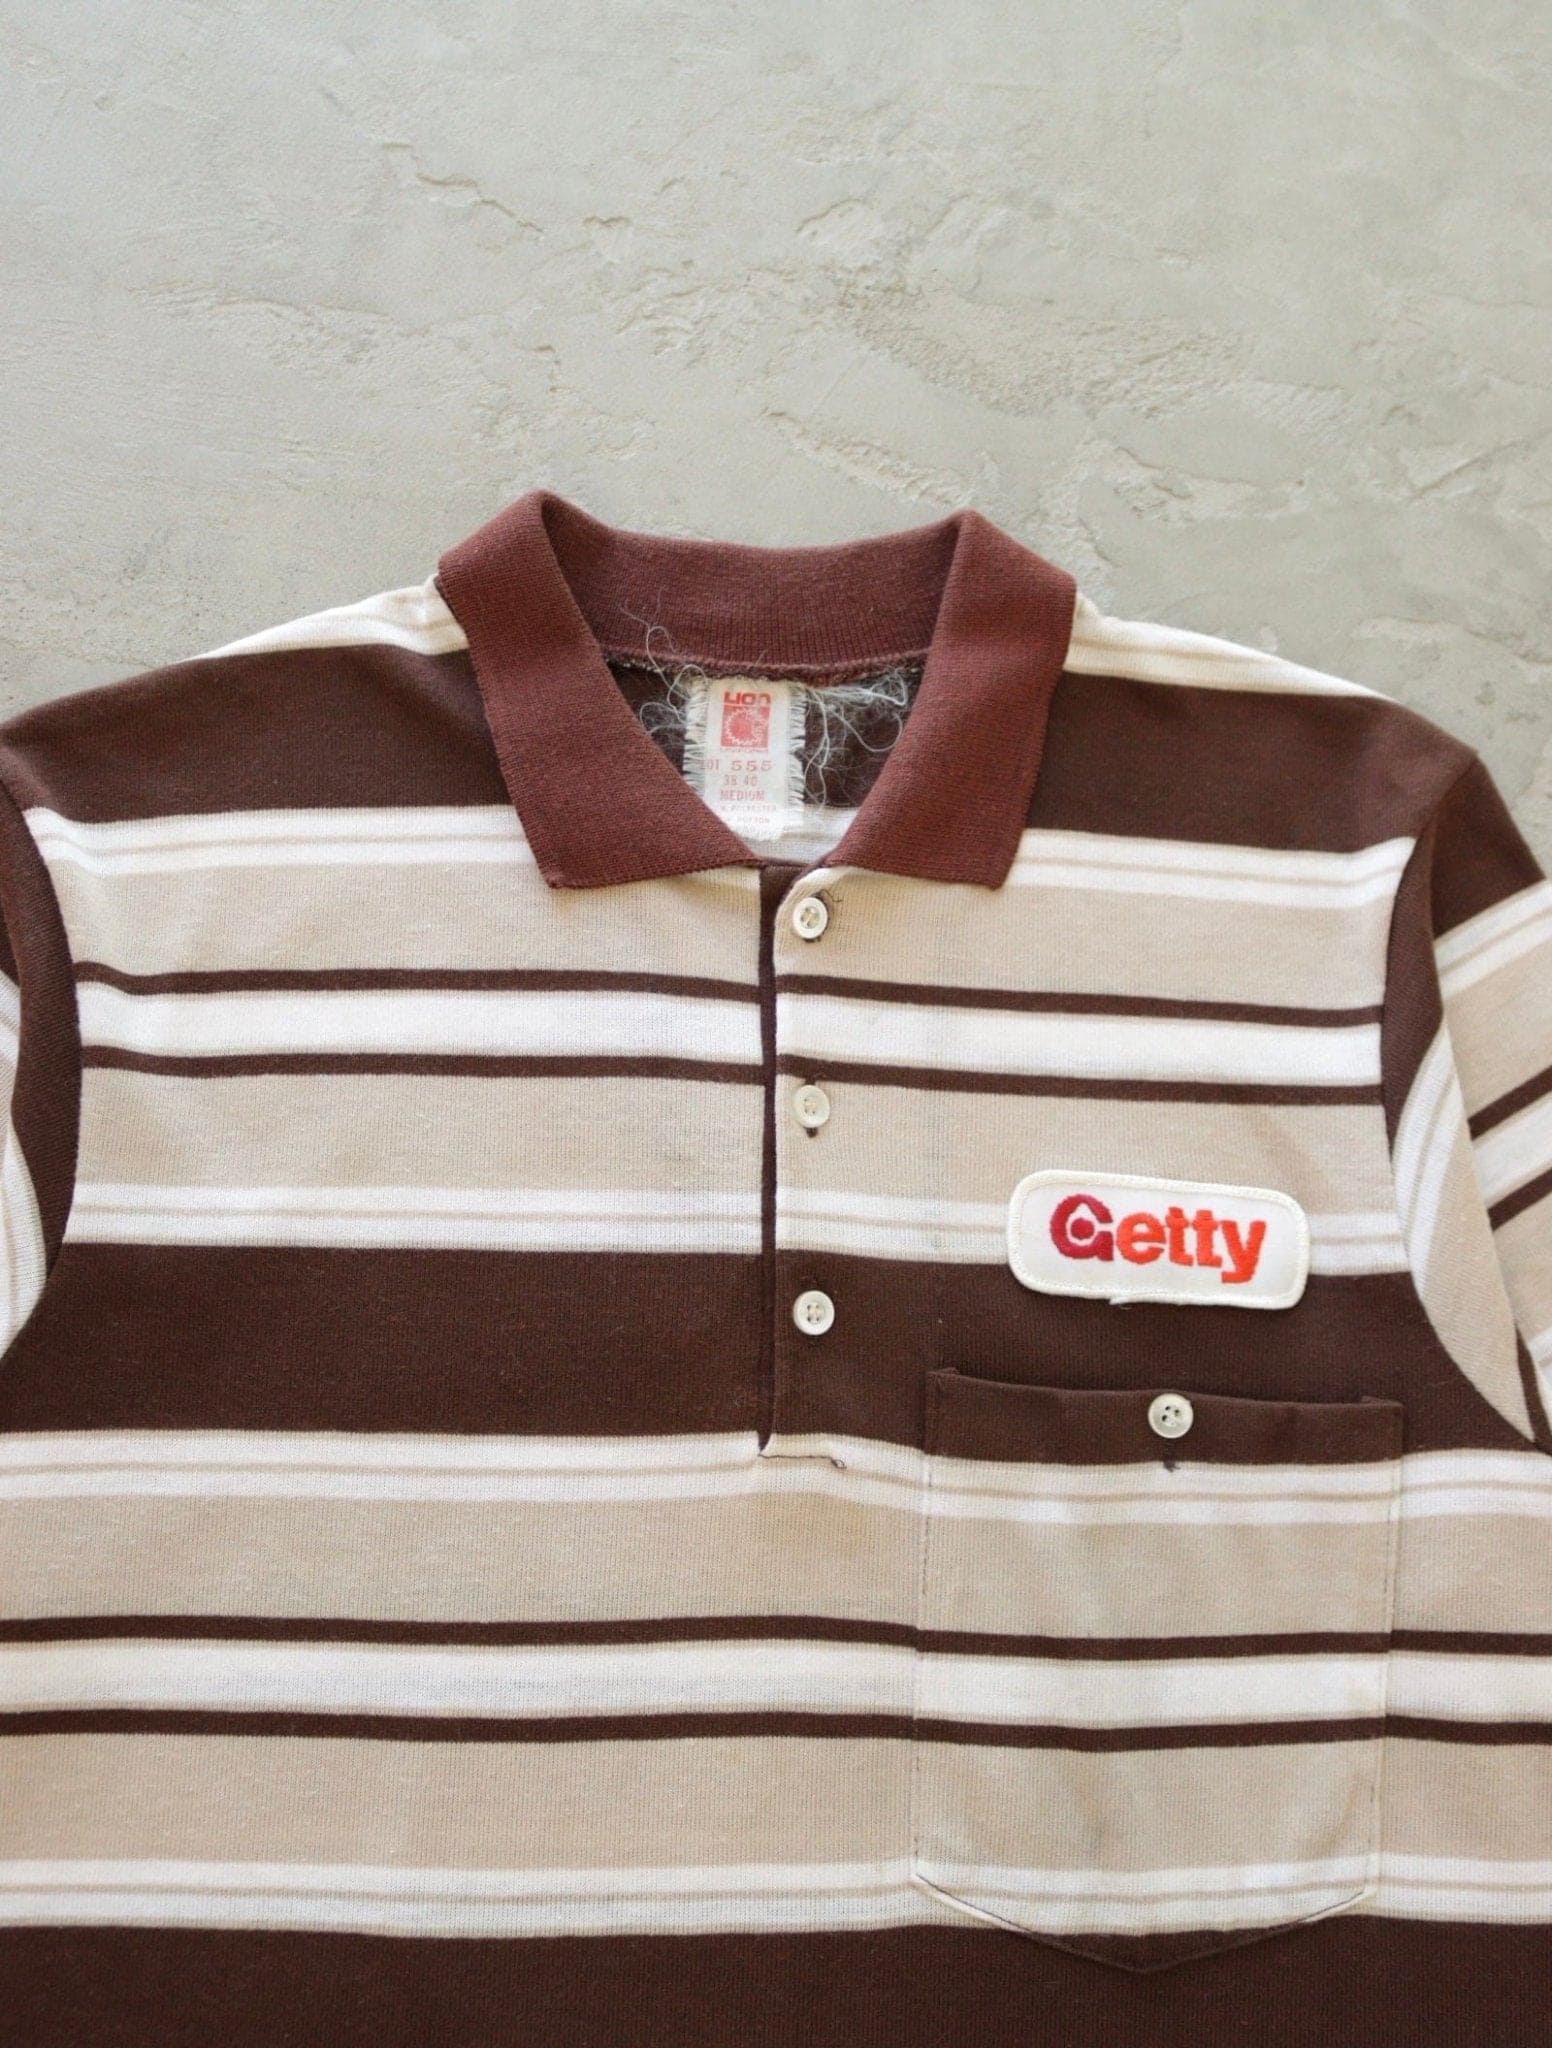 1970S GETTY GAS STATION SHIRT - TWO FOLD